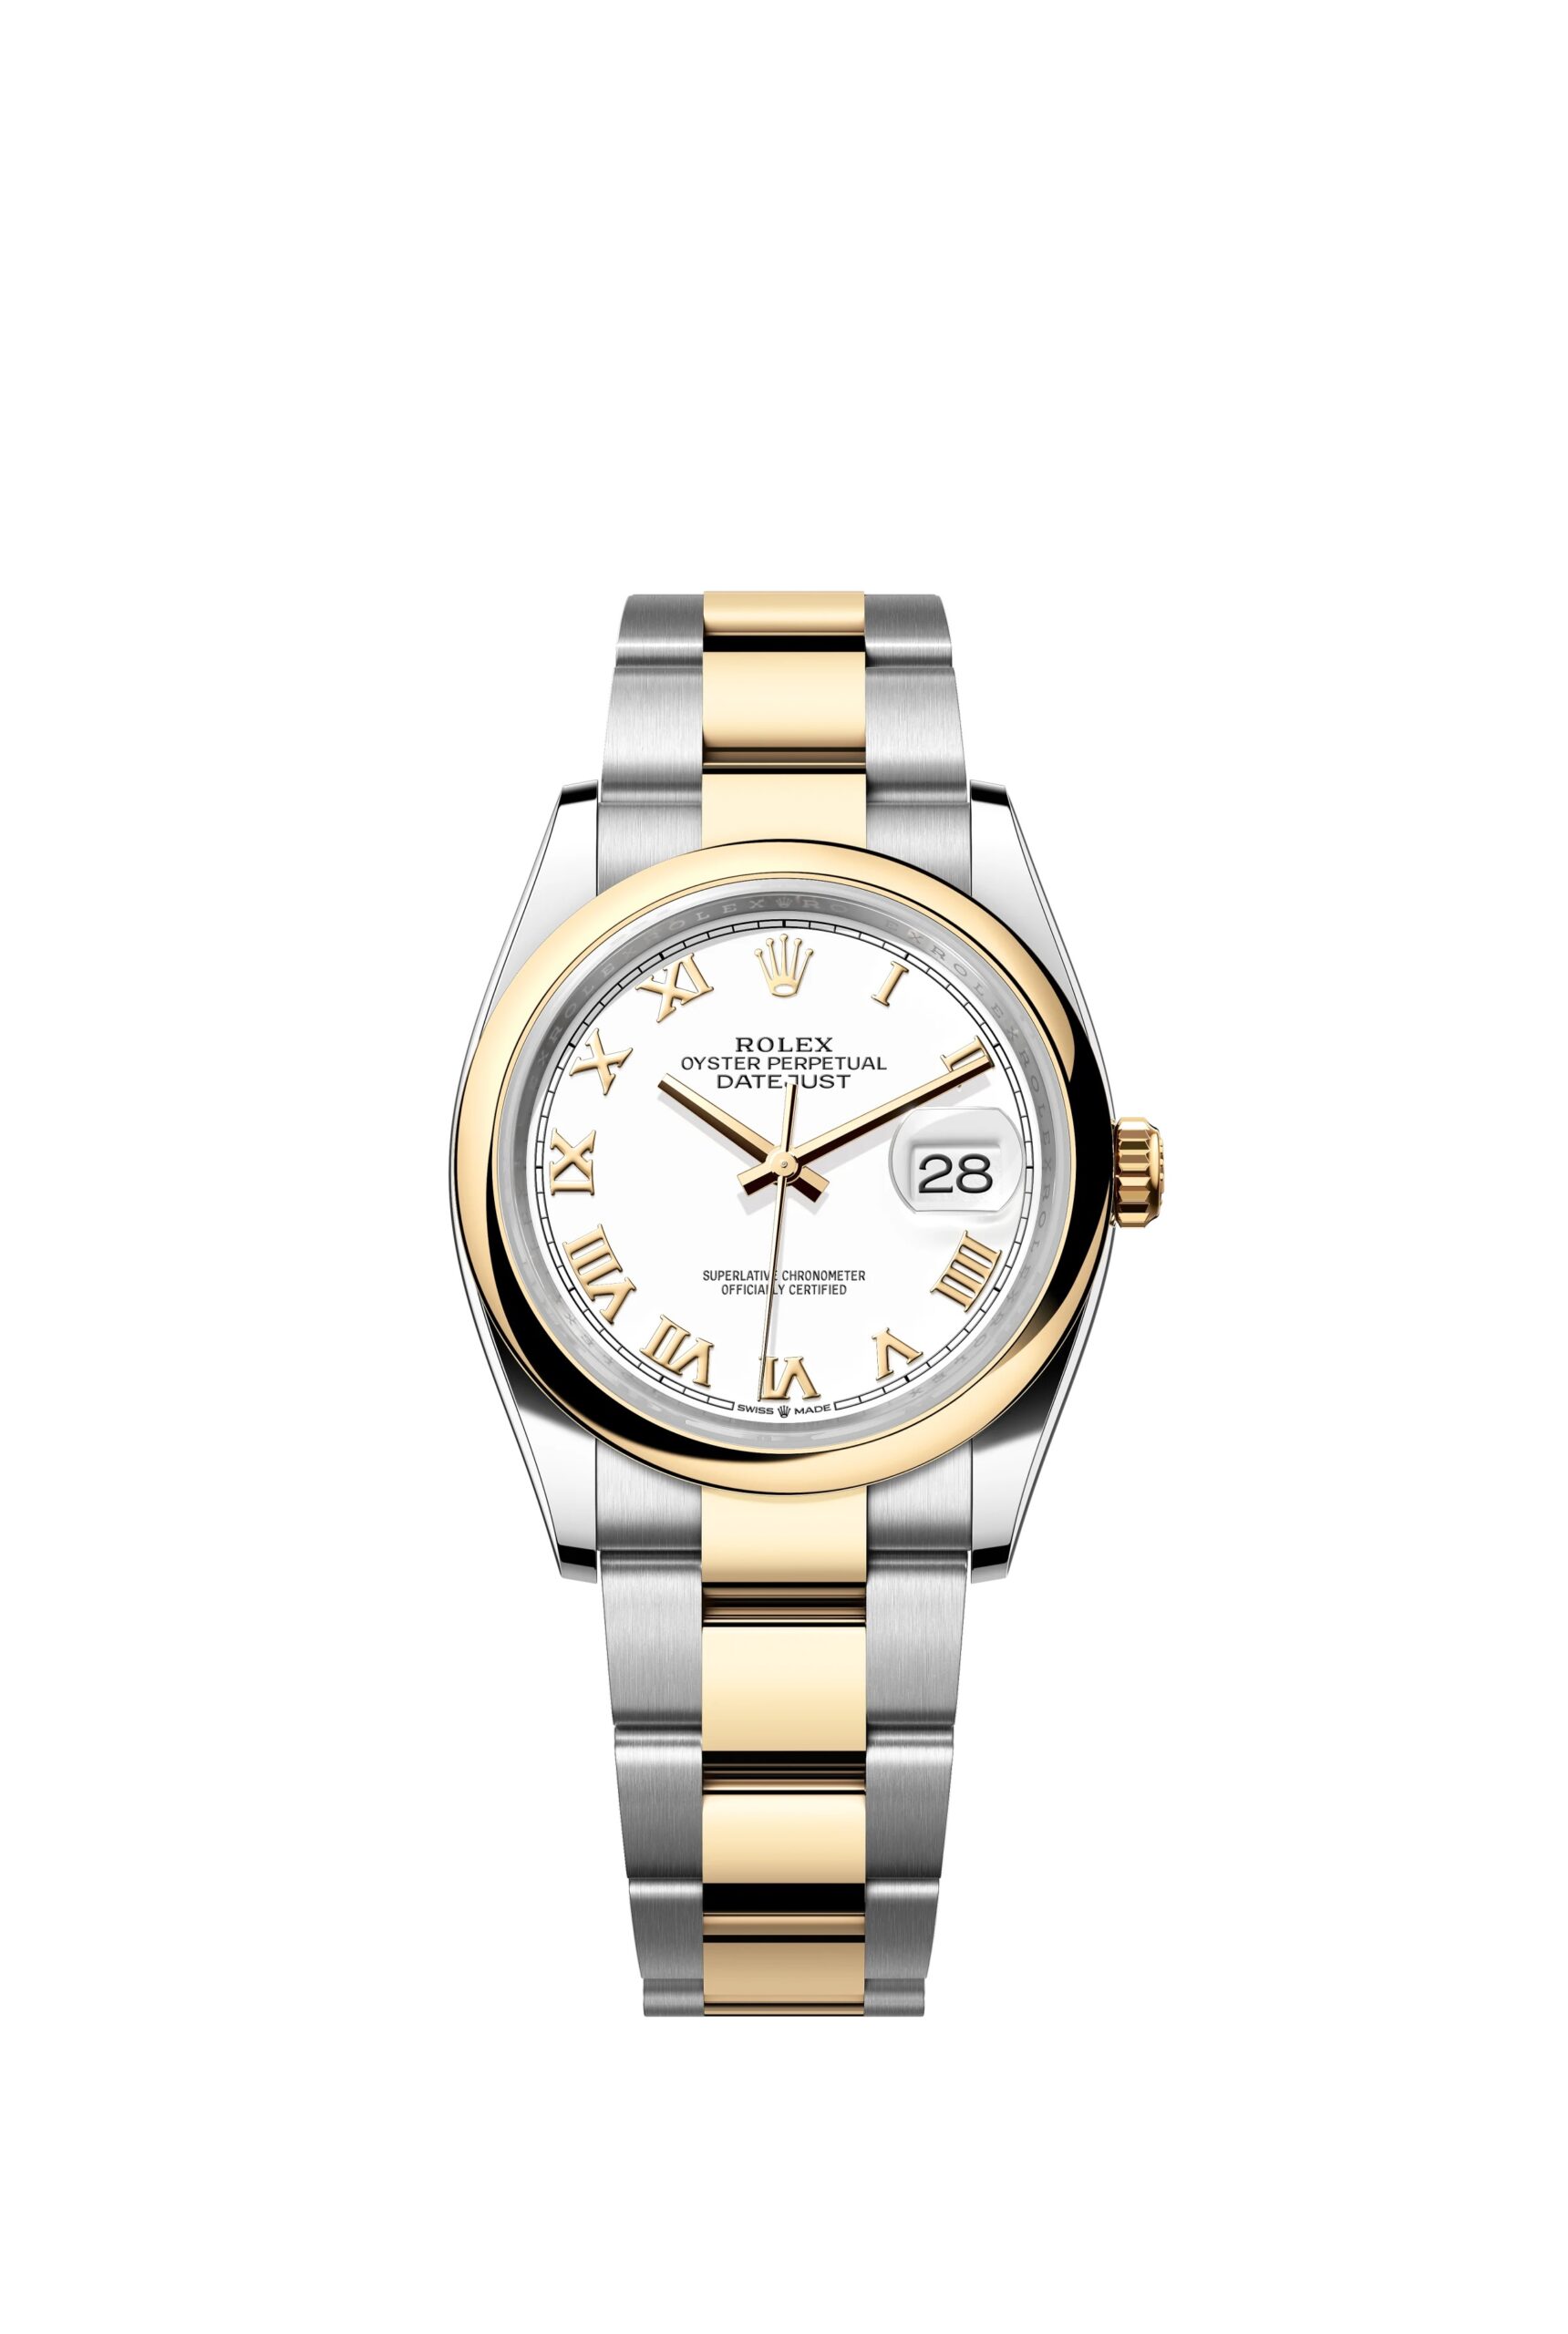 Rolex Datejust 36 Oyster, 36 mm, Oystersteel and yellow gold Reference 126203